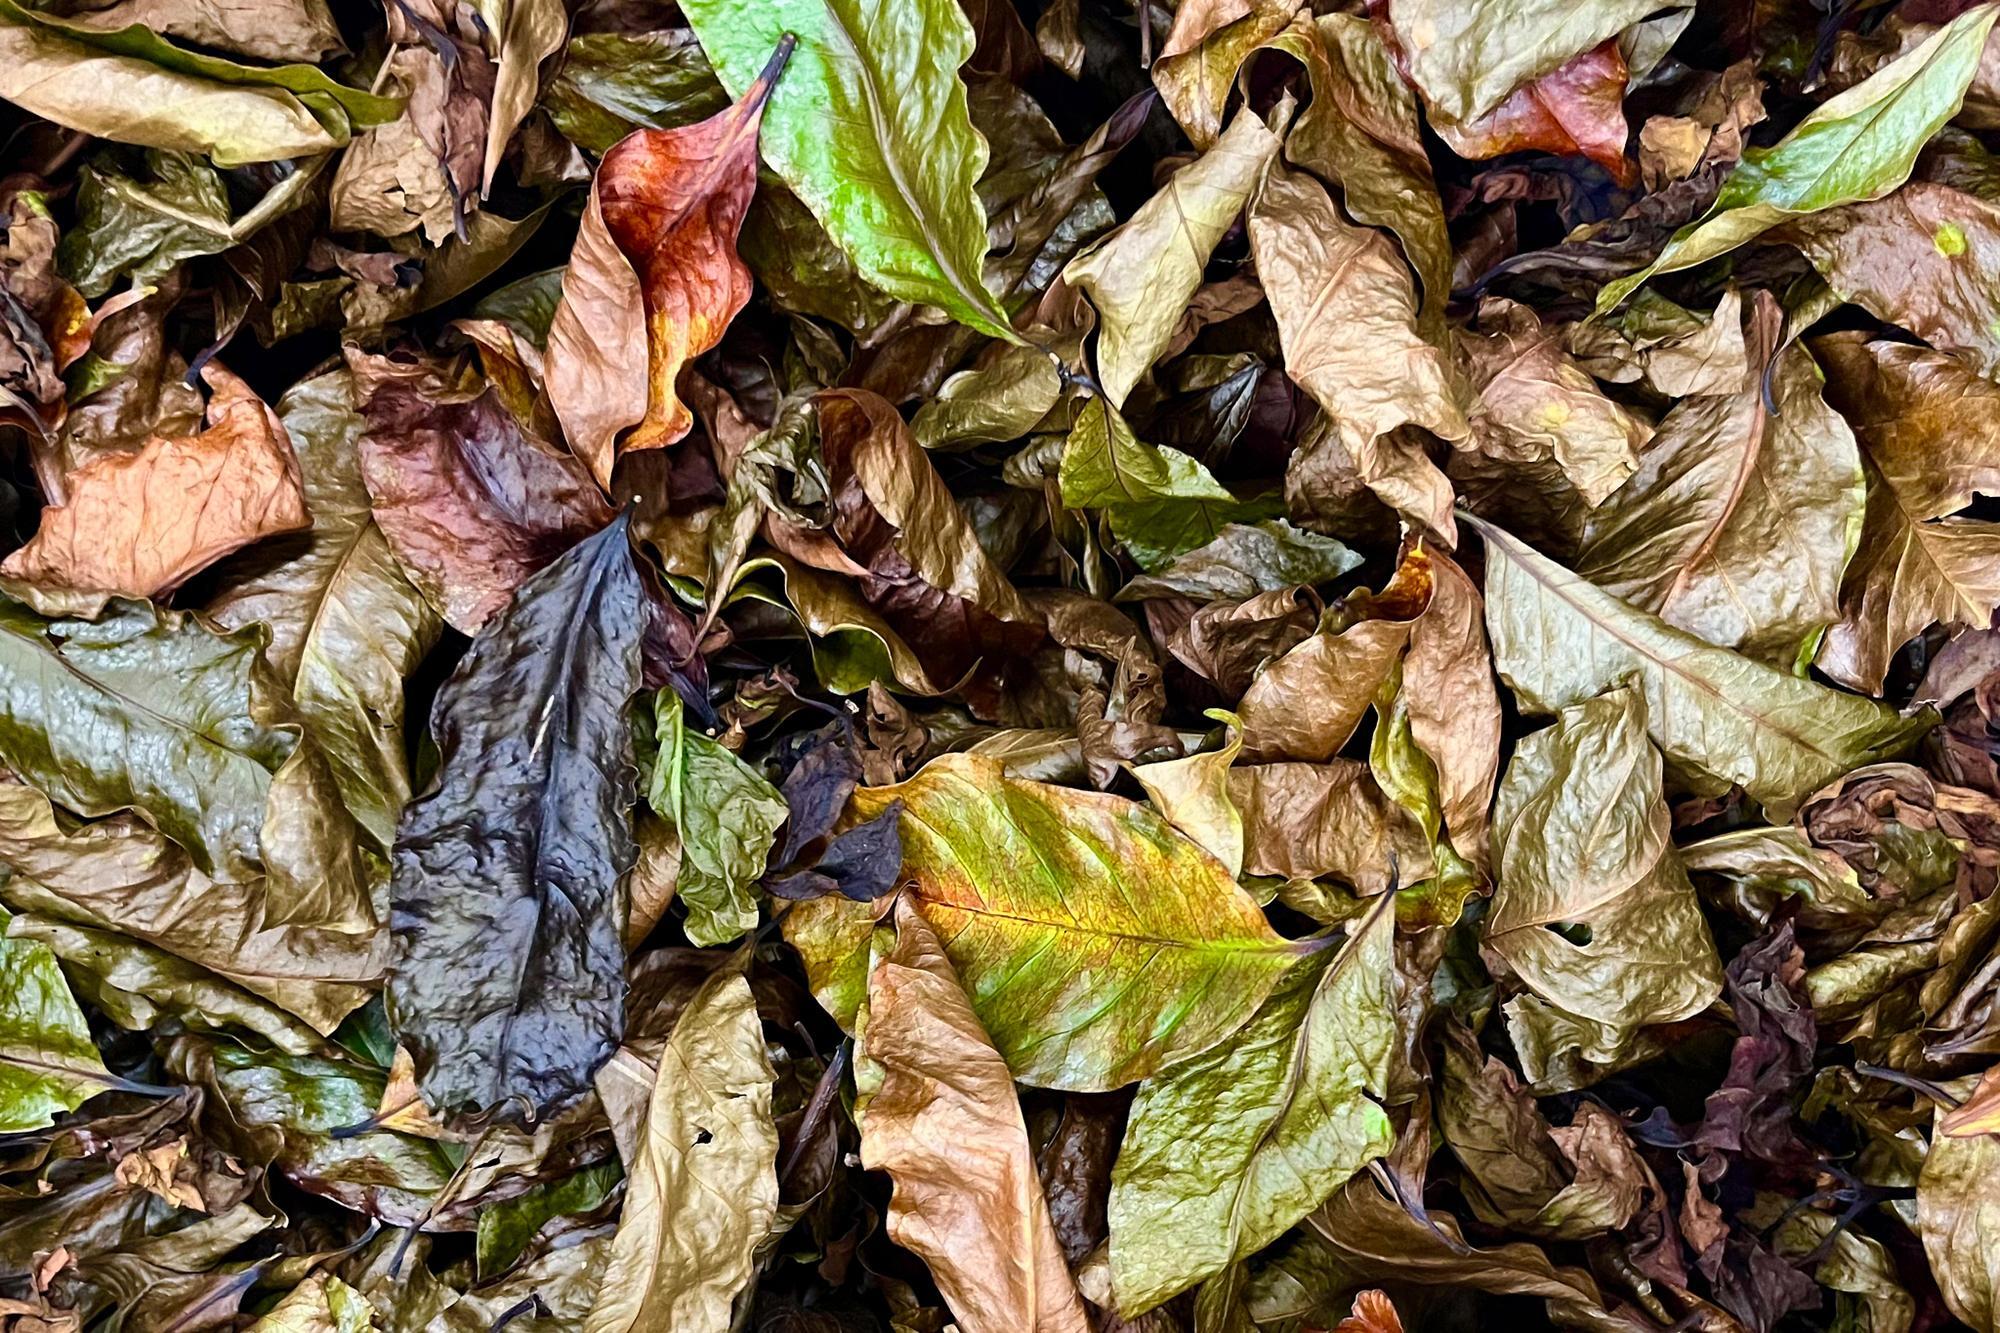 The NTHU team assists M'utu farmers in developing unique products by turning coffee leaves into tea.